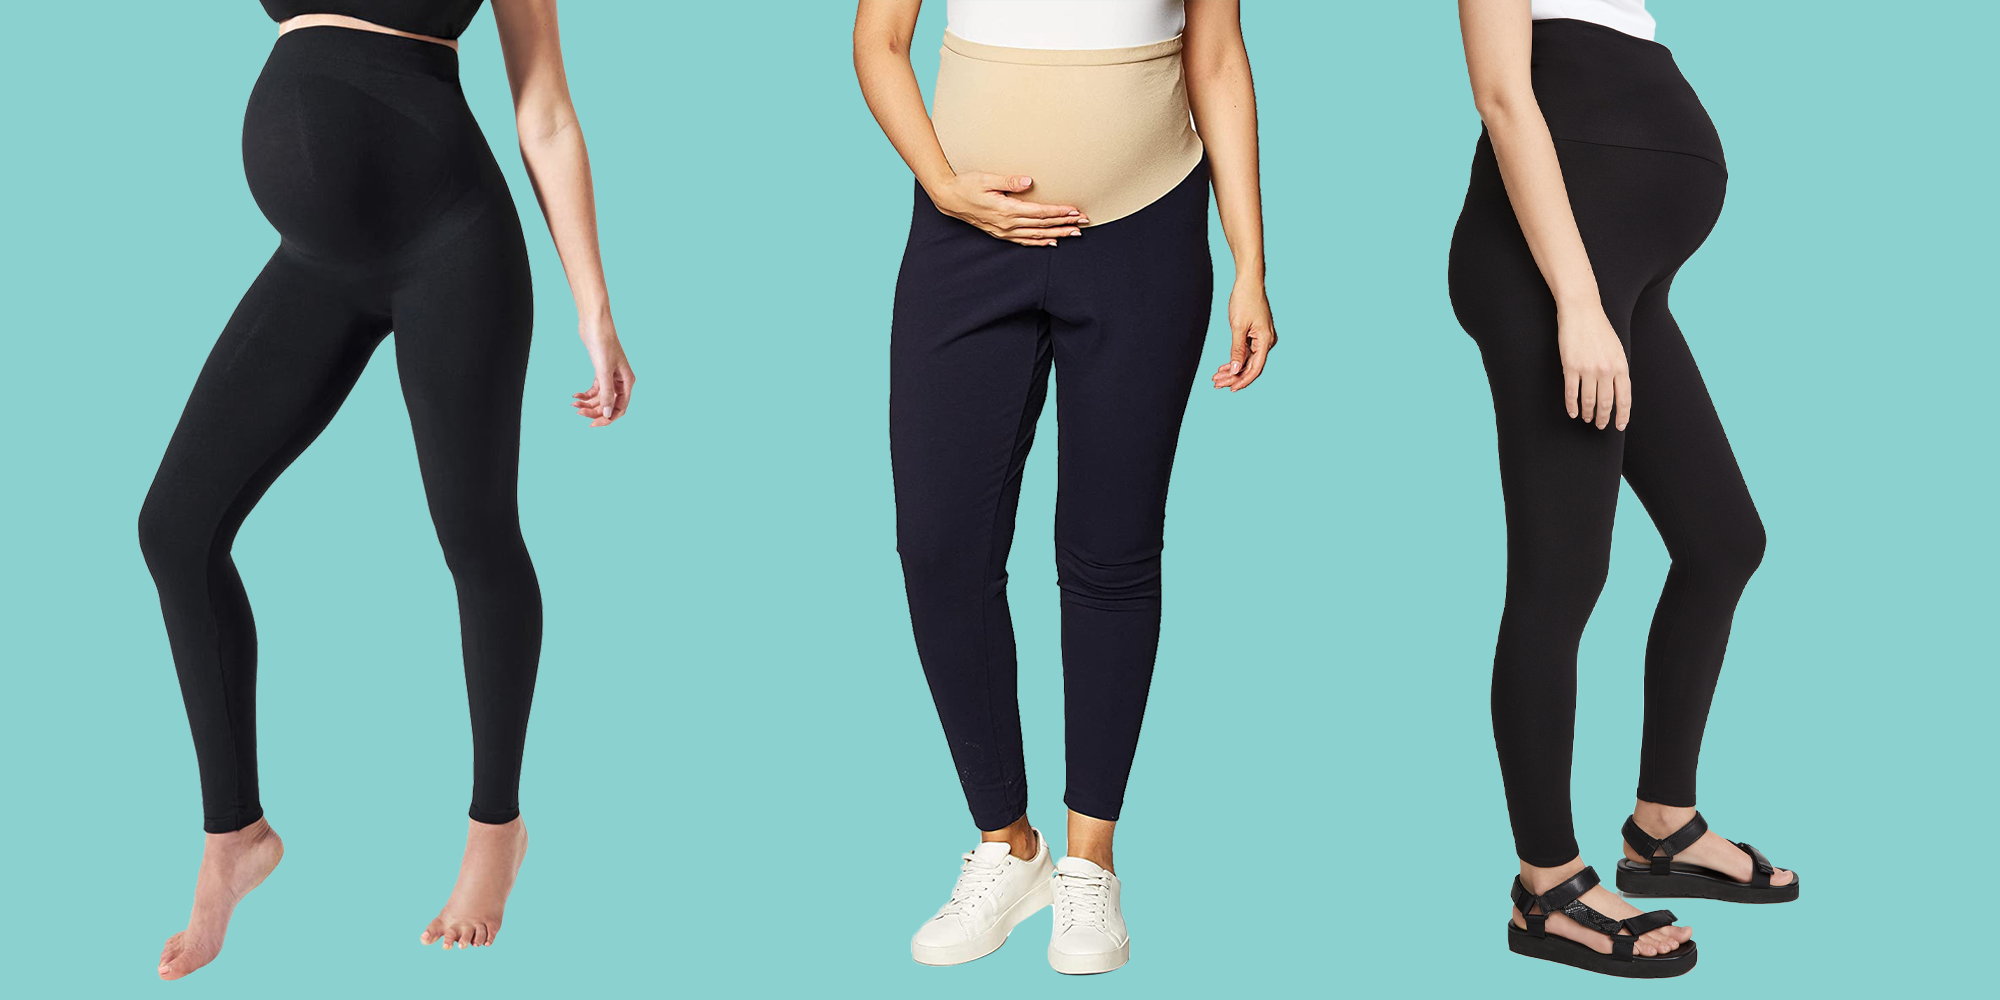 Why wearing tight clothes in pregnancy isnt worth the trouble Physicians   Healthwise